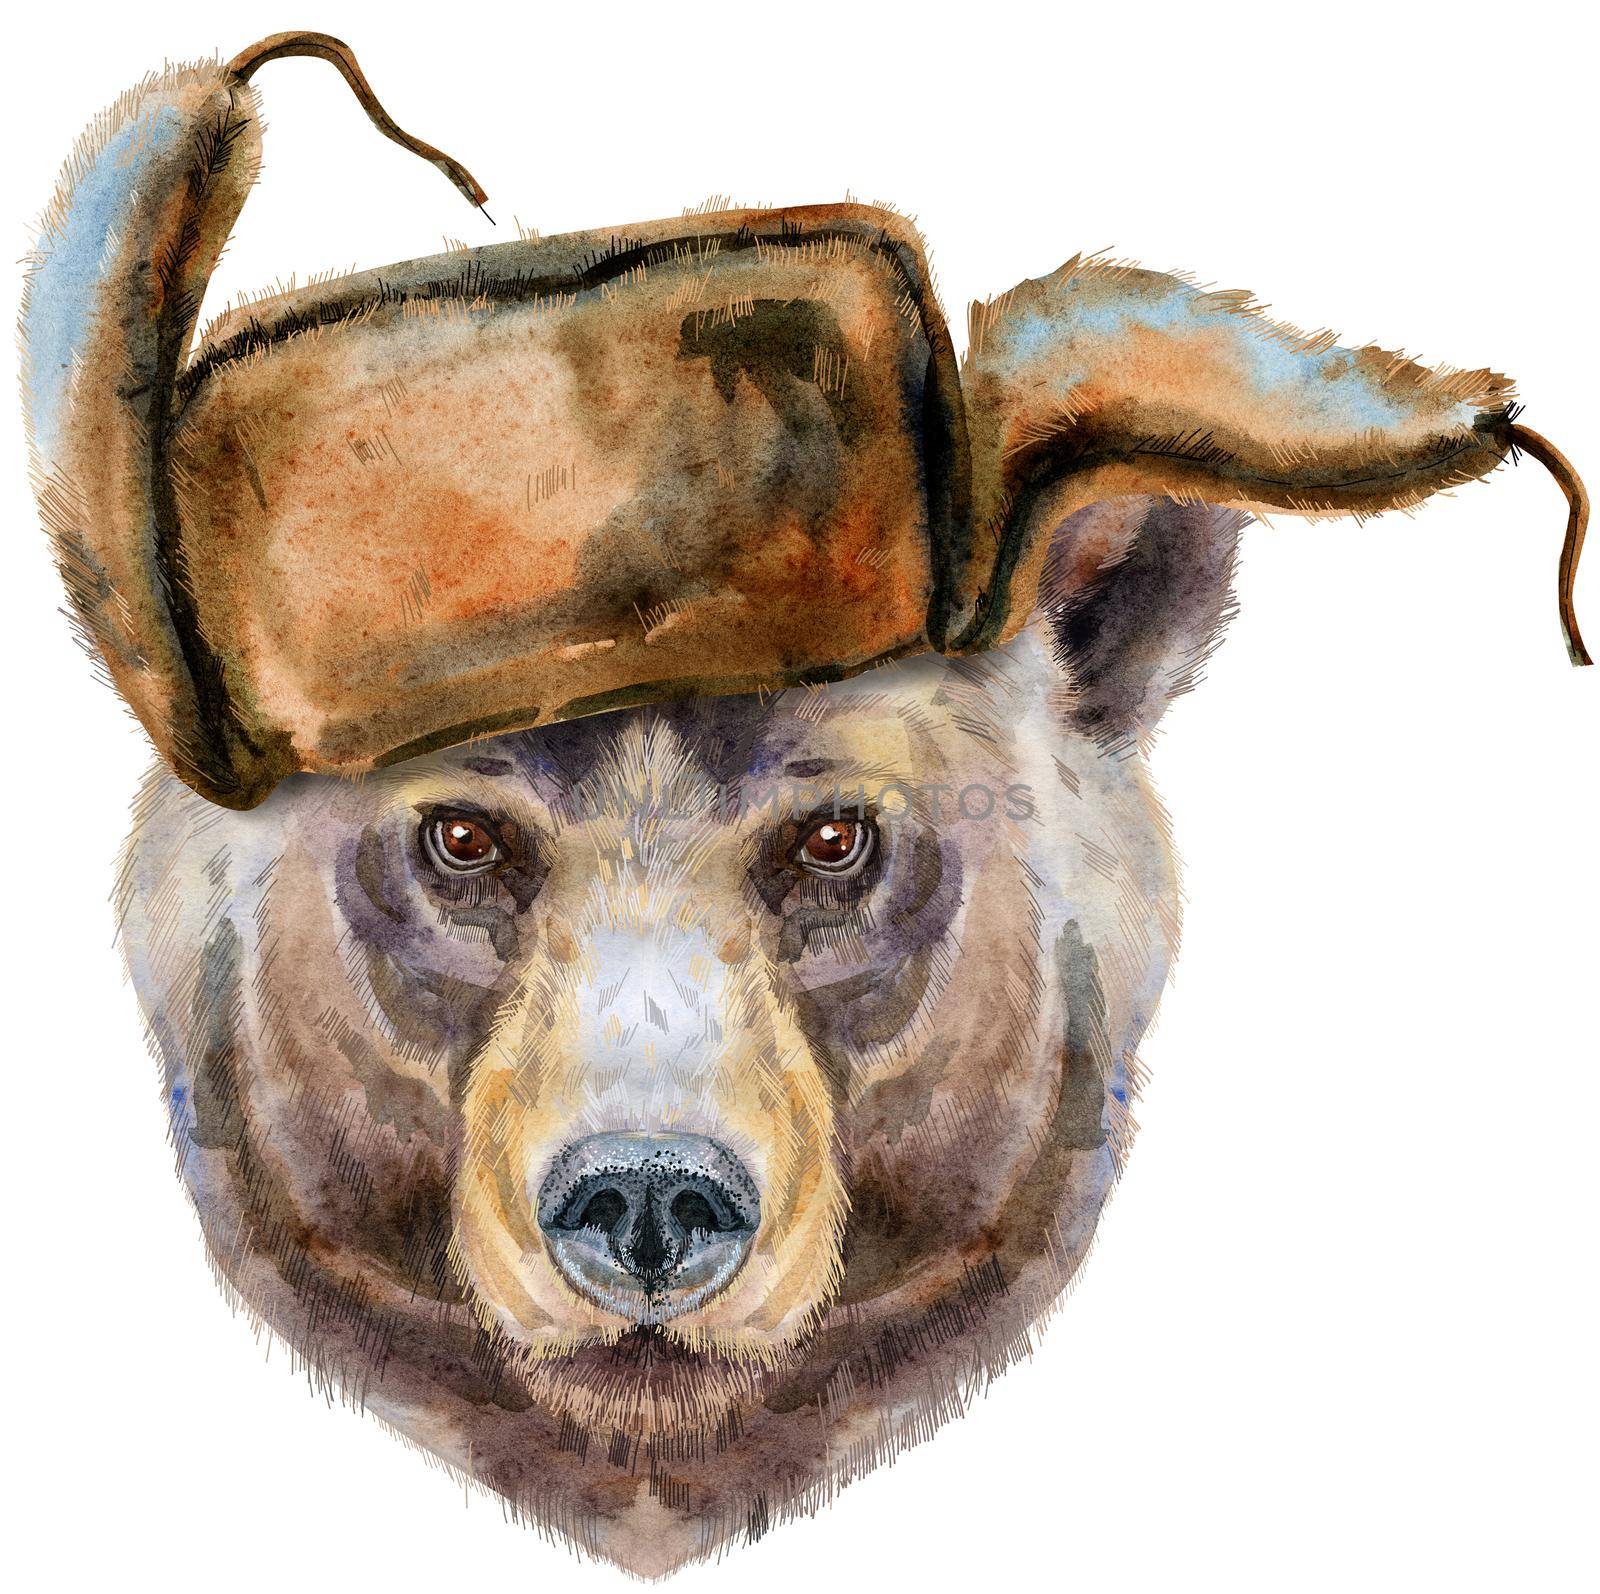 Bear head in hat. Watercolor bear painting illustration isolated on white background by NataOmsk